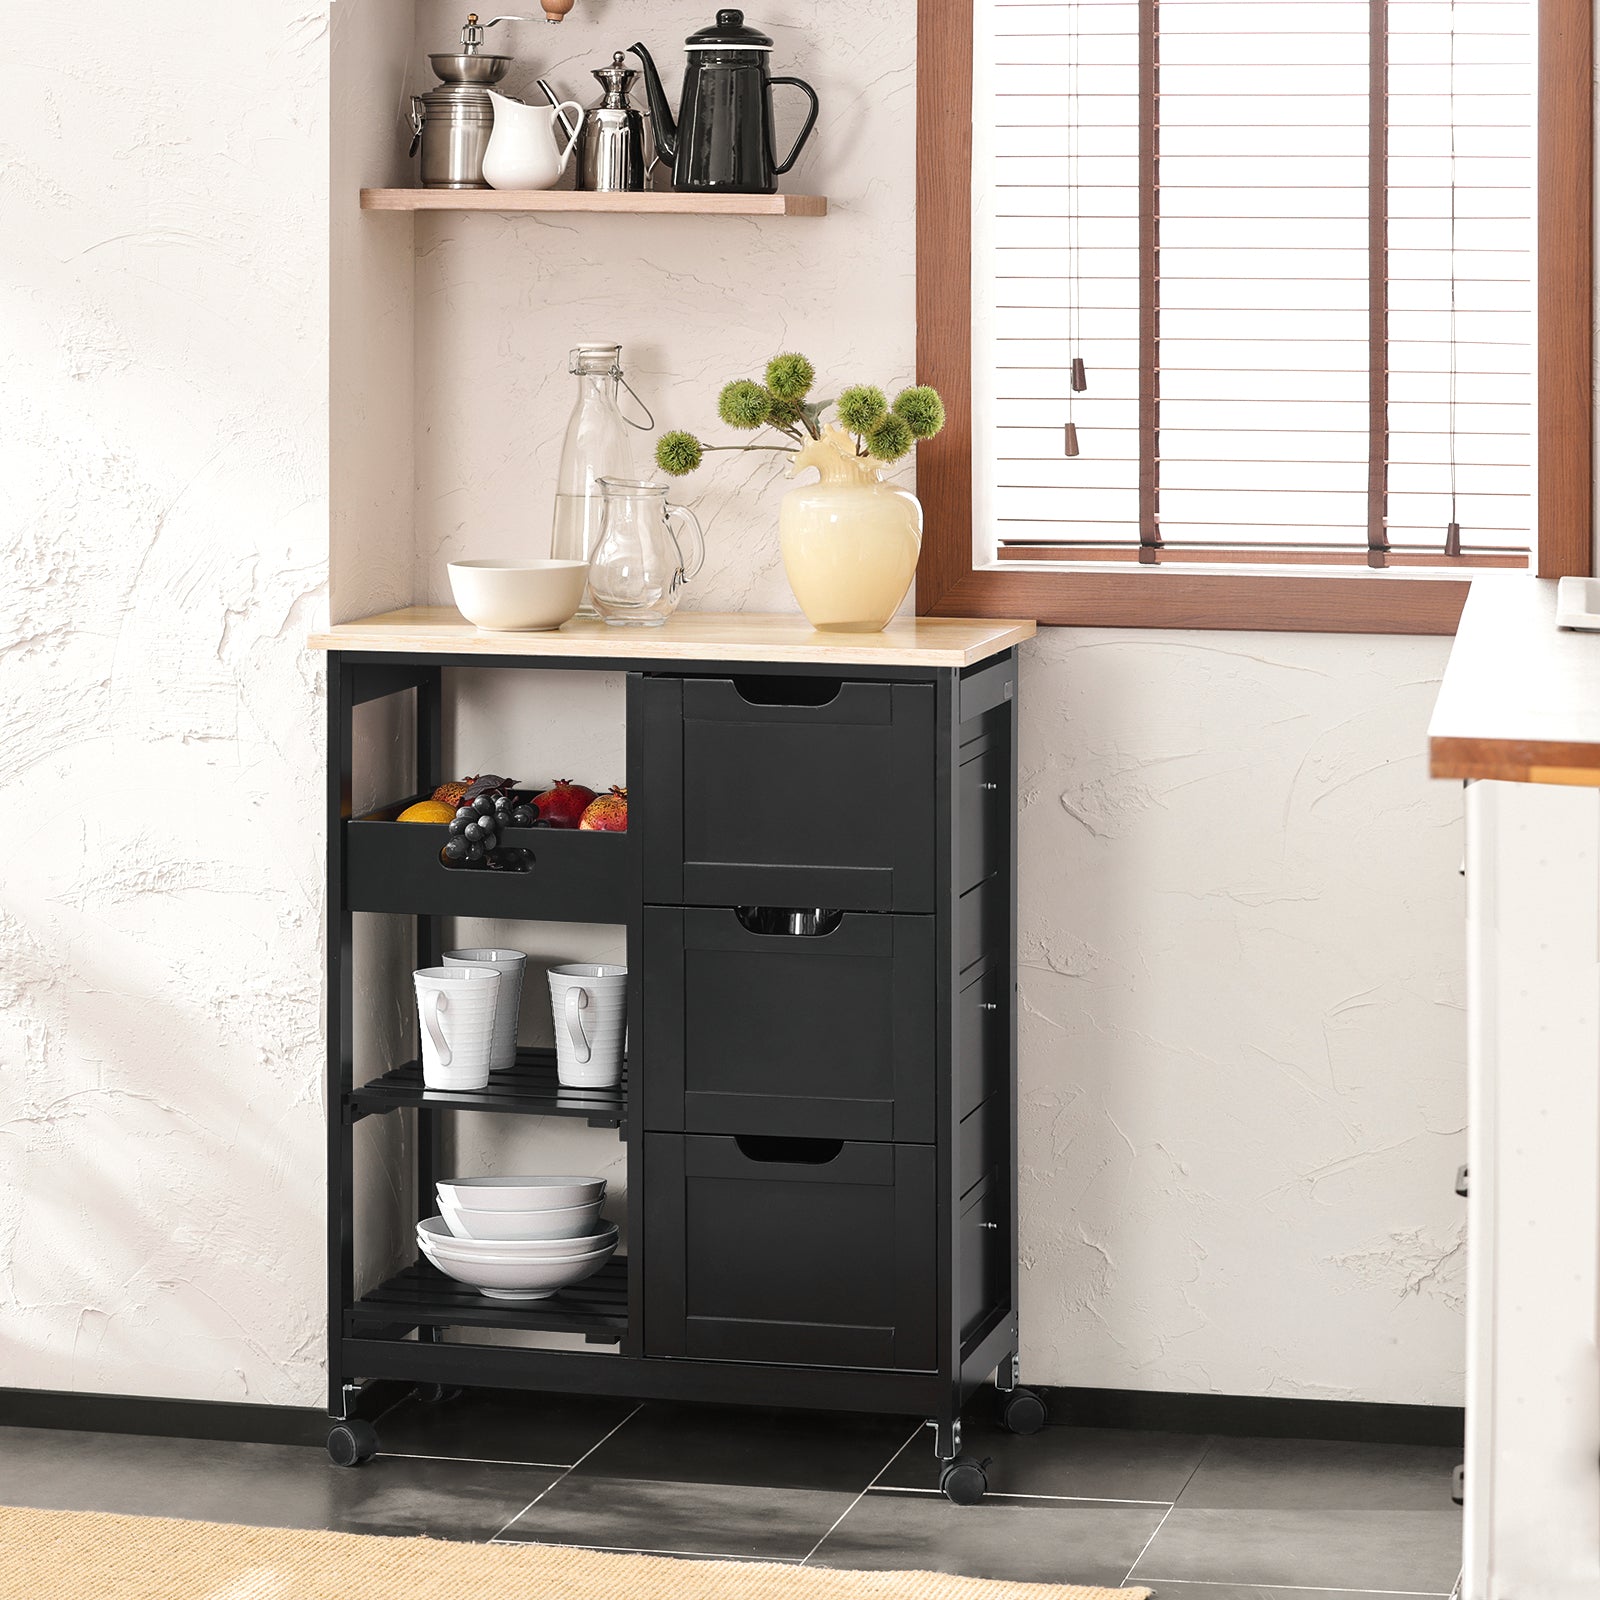 SoBuy FKW79-SCH,Kitchen Serving Cart with 3 Drawers and Removable Tray,Kitchen Storage Trolley,Black